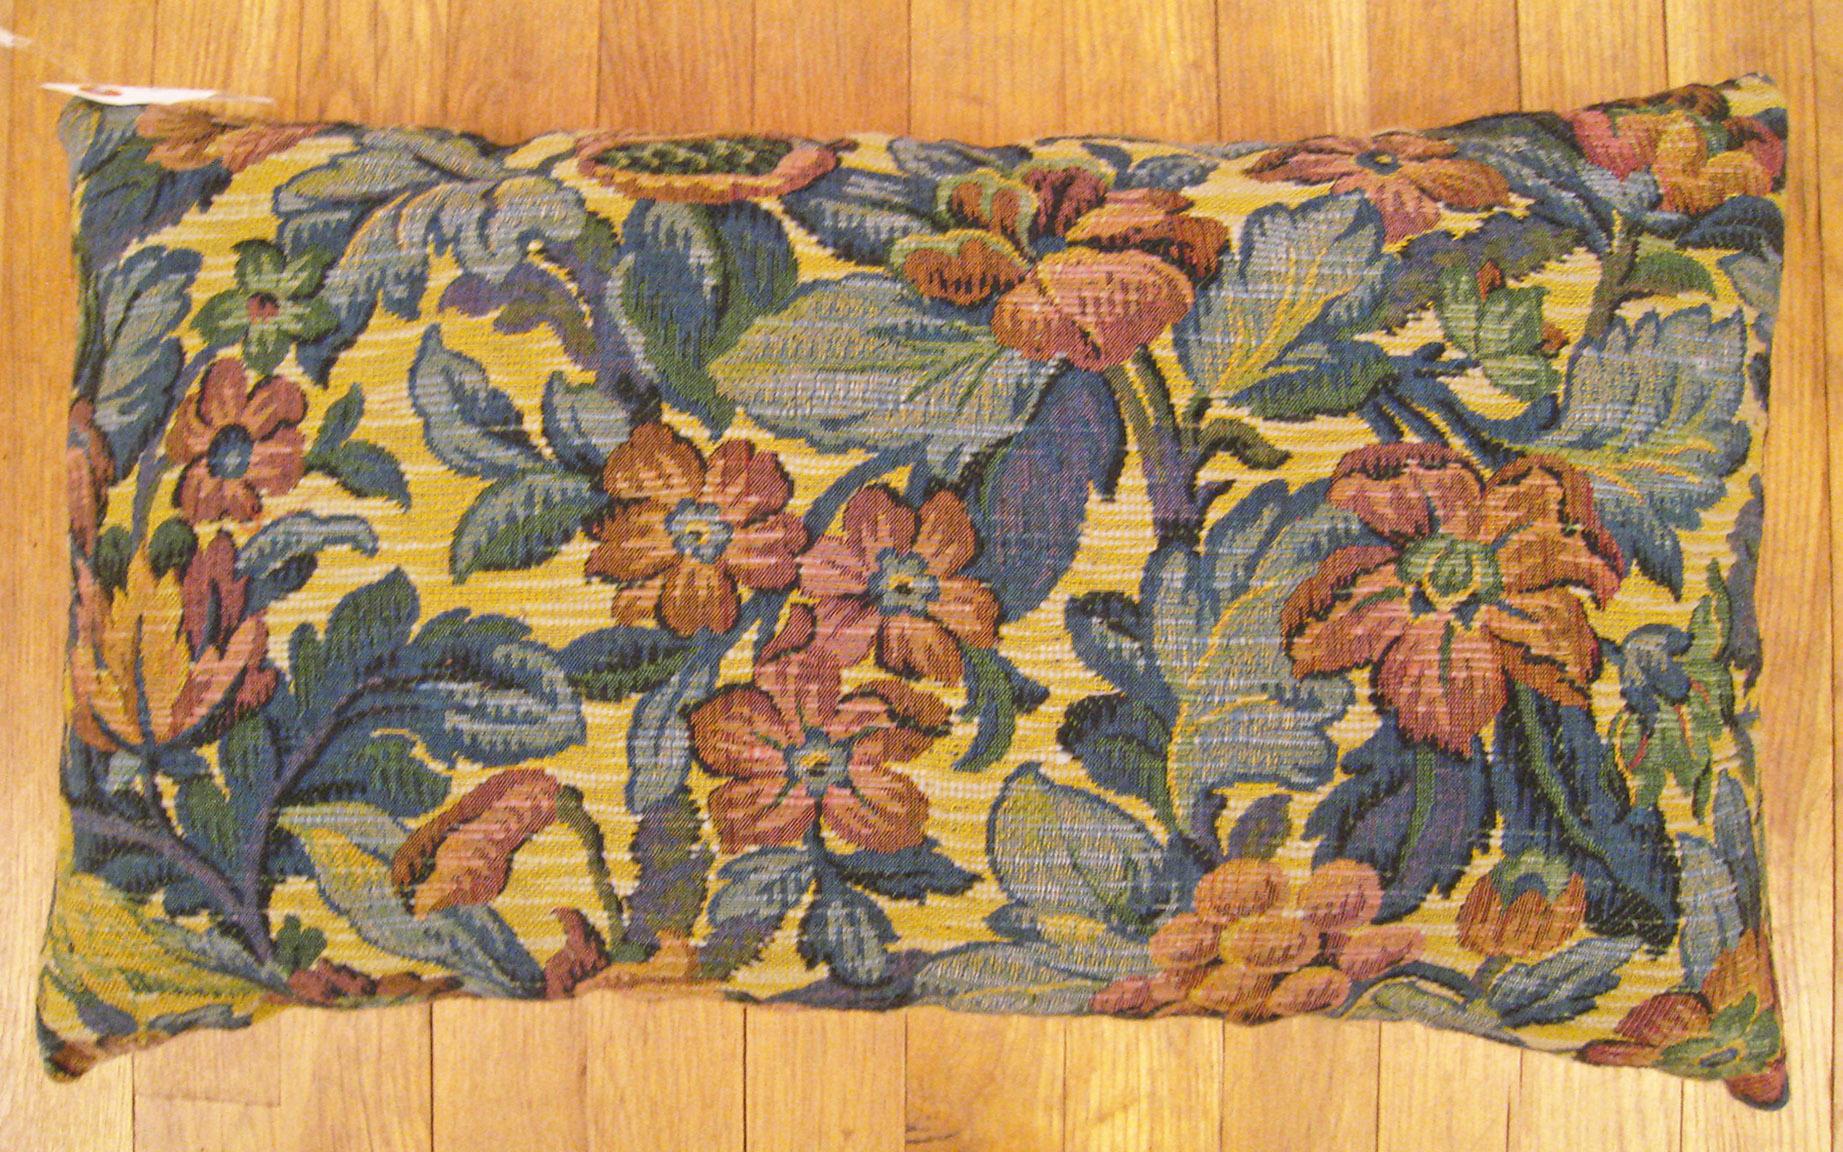 Antique Jacquard Tapestry Pillow; size 1'2” x 2'0”.

An antique decorative pillow with floral elements and birds allover a blue green central field, size 1'2